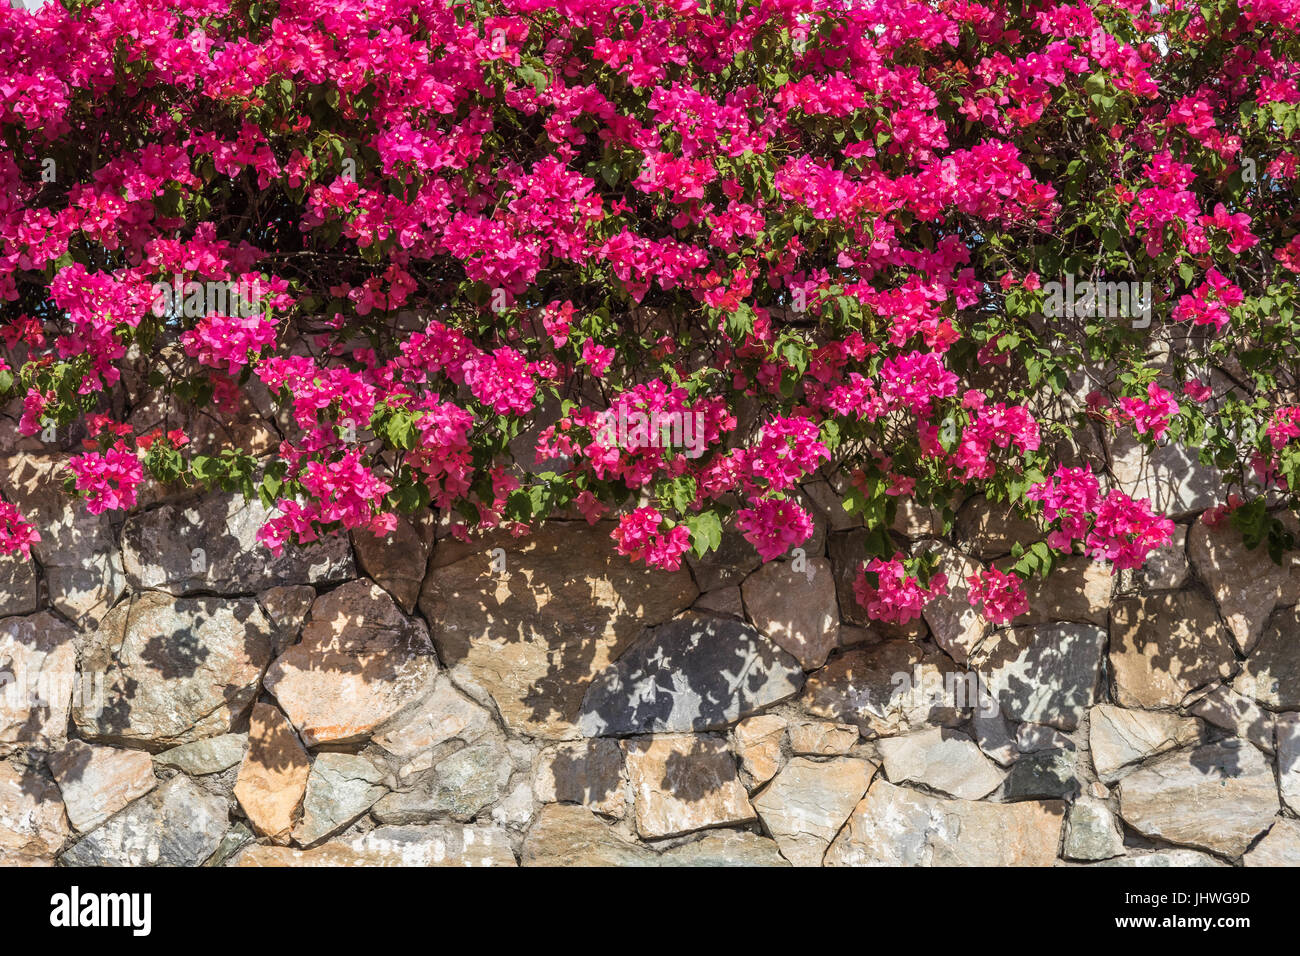 This hot pink bougainvillea casts strong shadows on a stone wall in Roatan, Honduras. Stock Photo